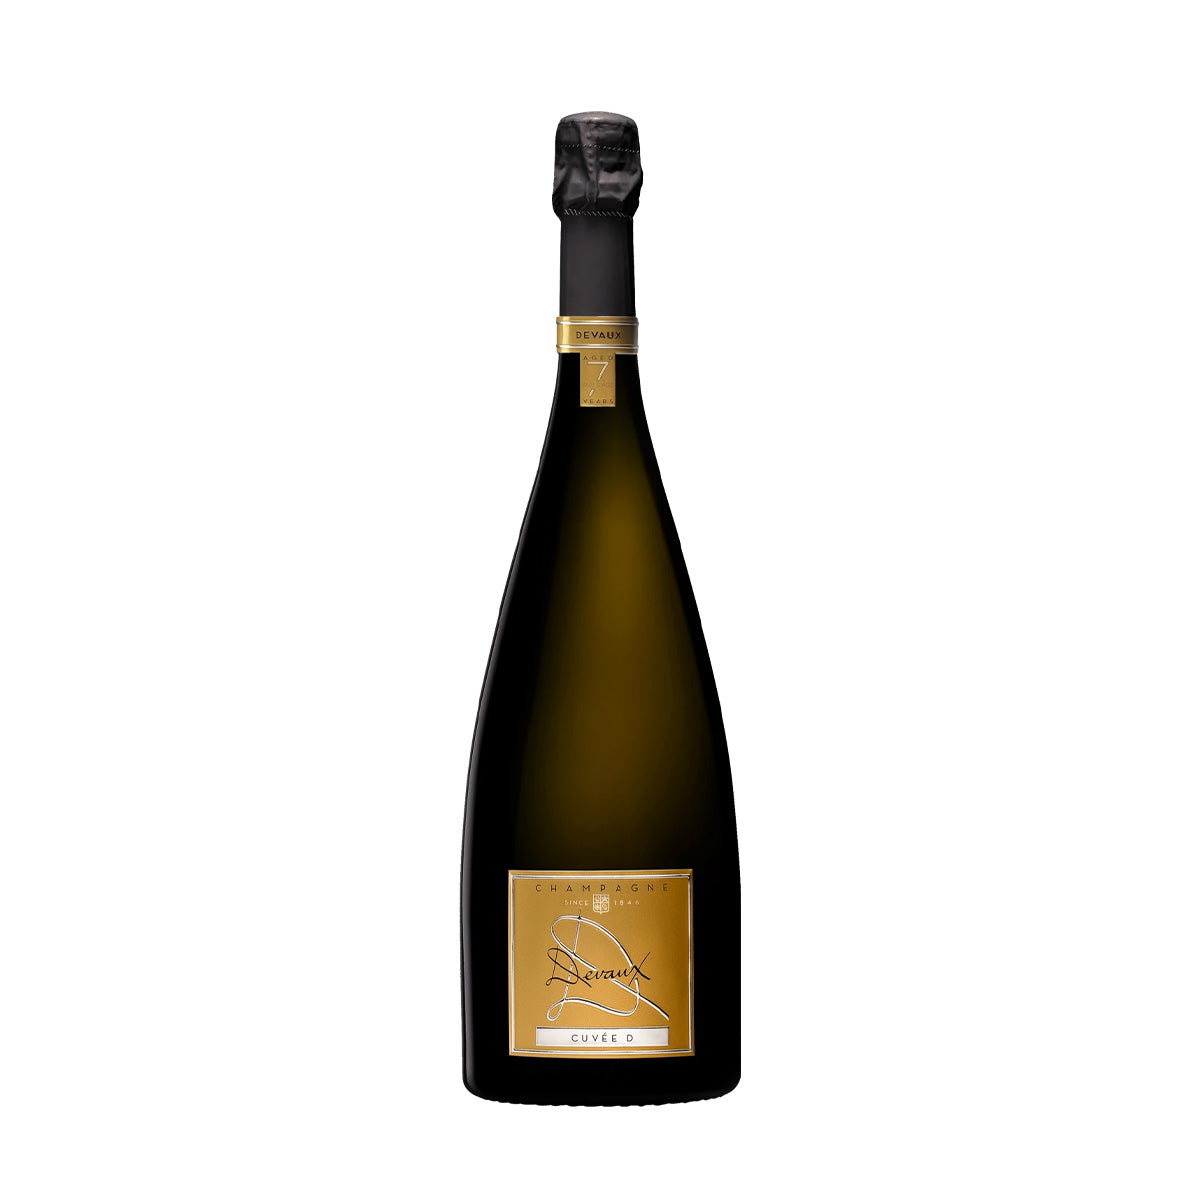 Champagne Devaux Cuvee D 'Aged 5 Years' NV